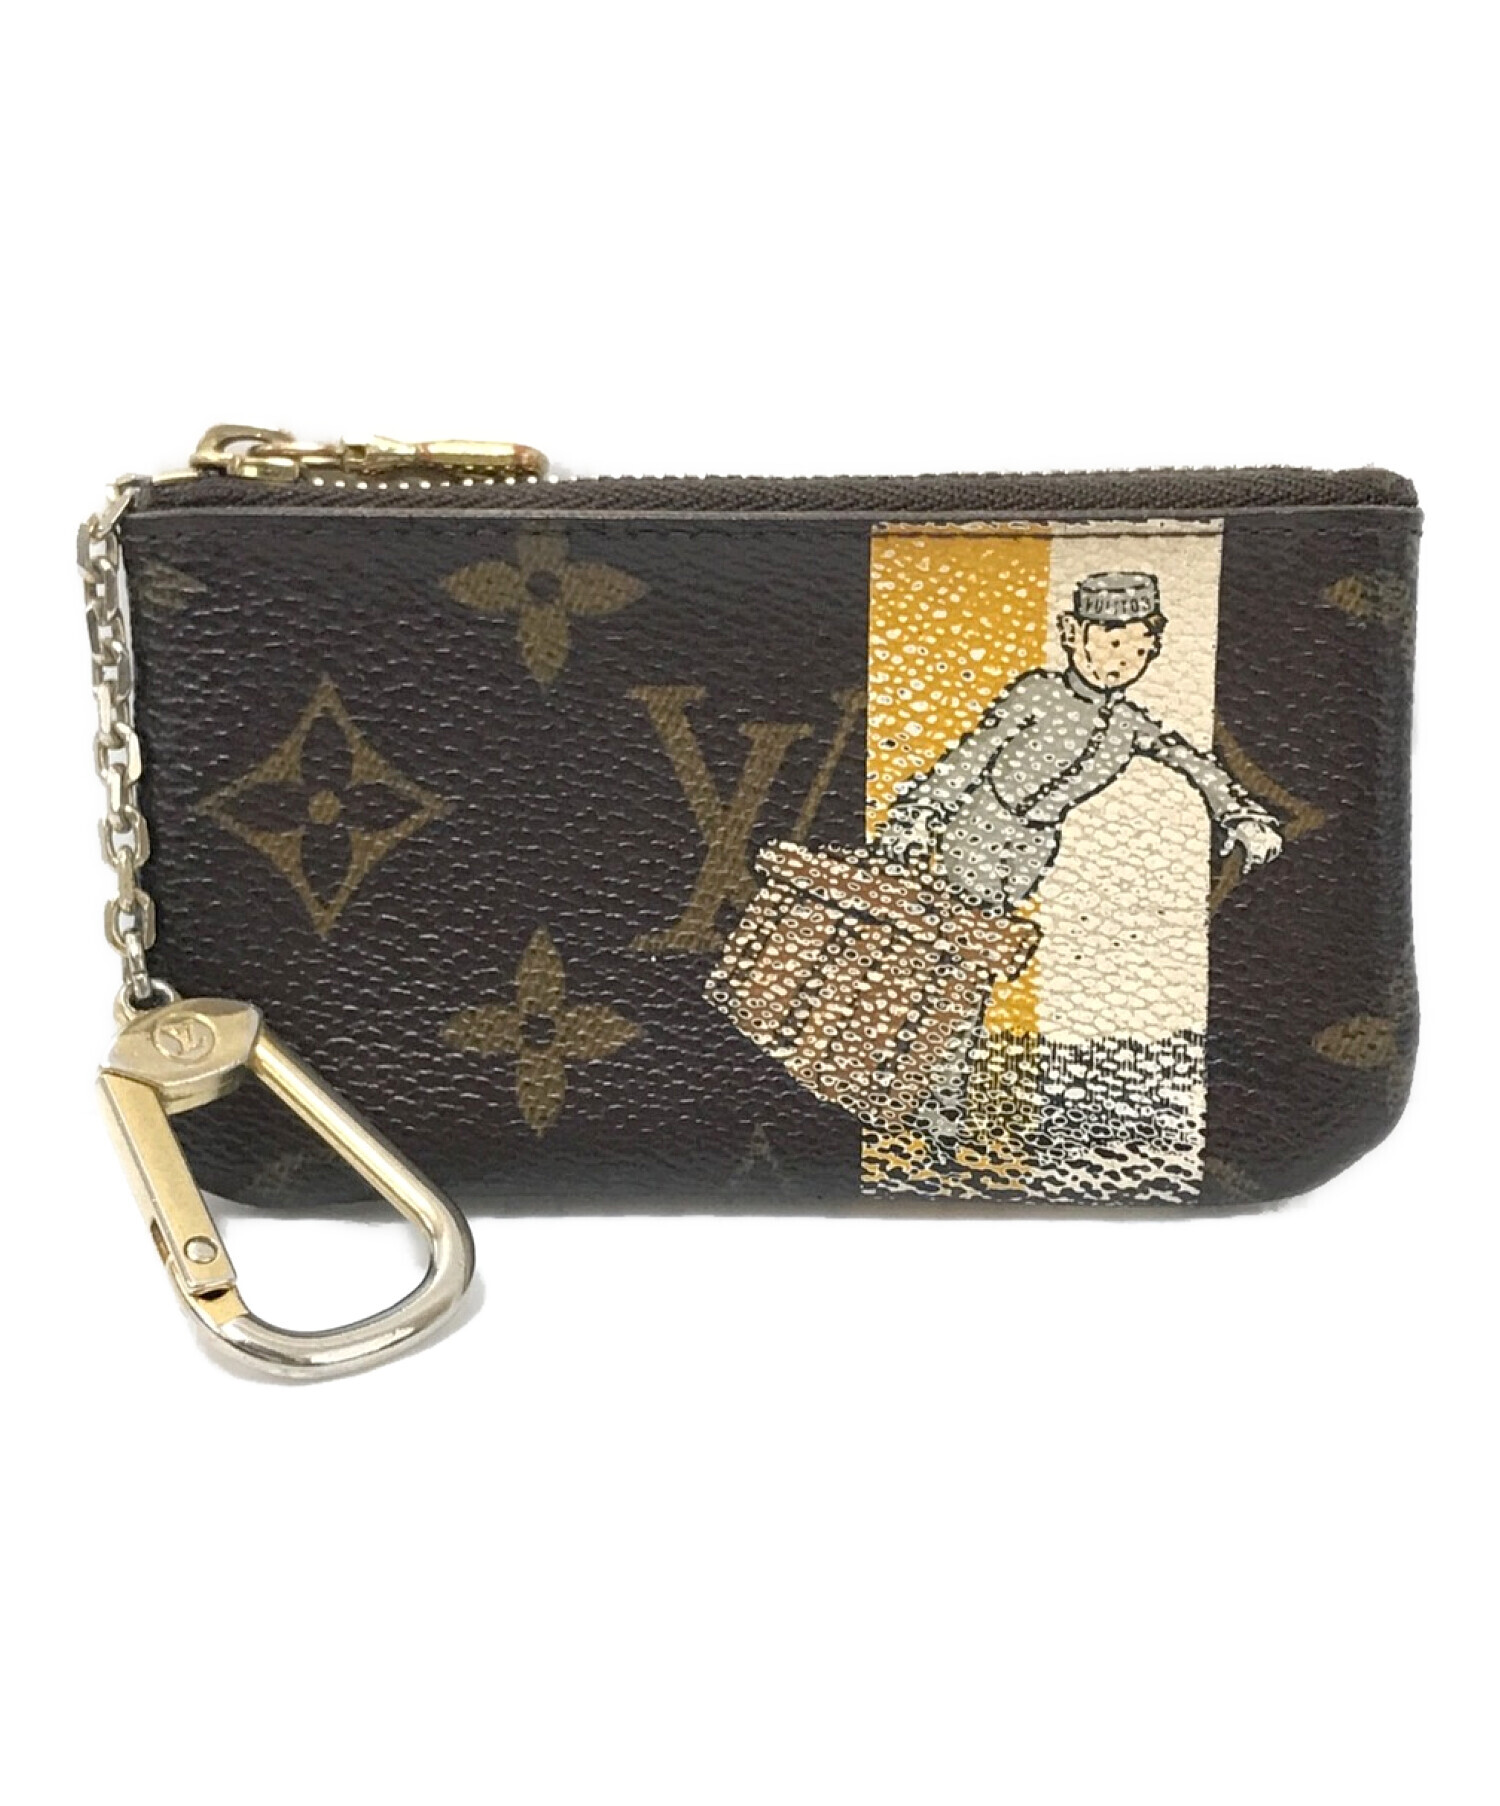 LOUIS VUITTON ルイヴィトン  ポシェットクレ  コインケース